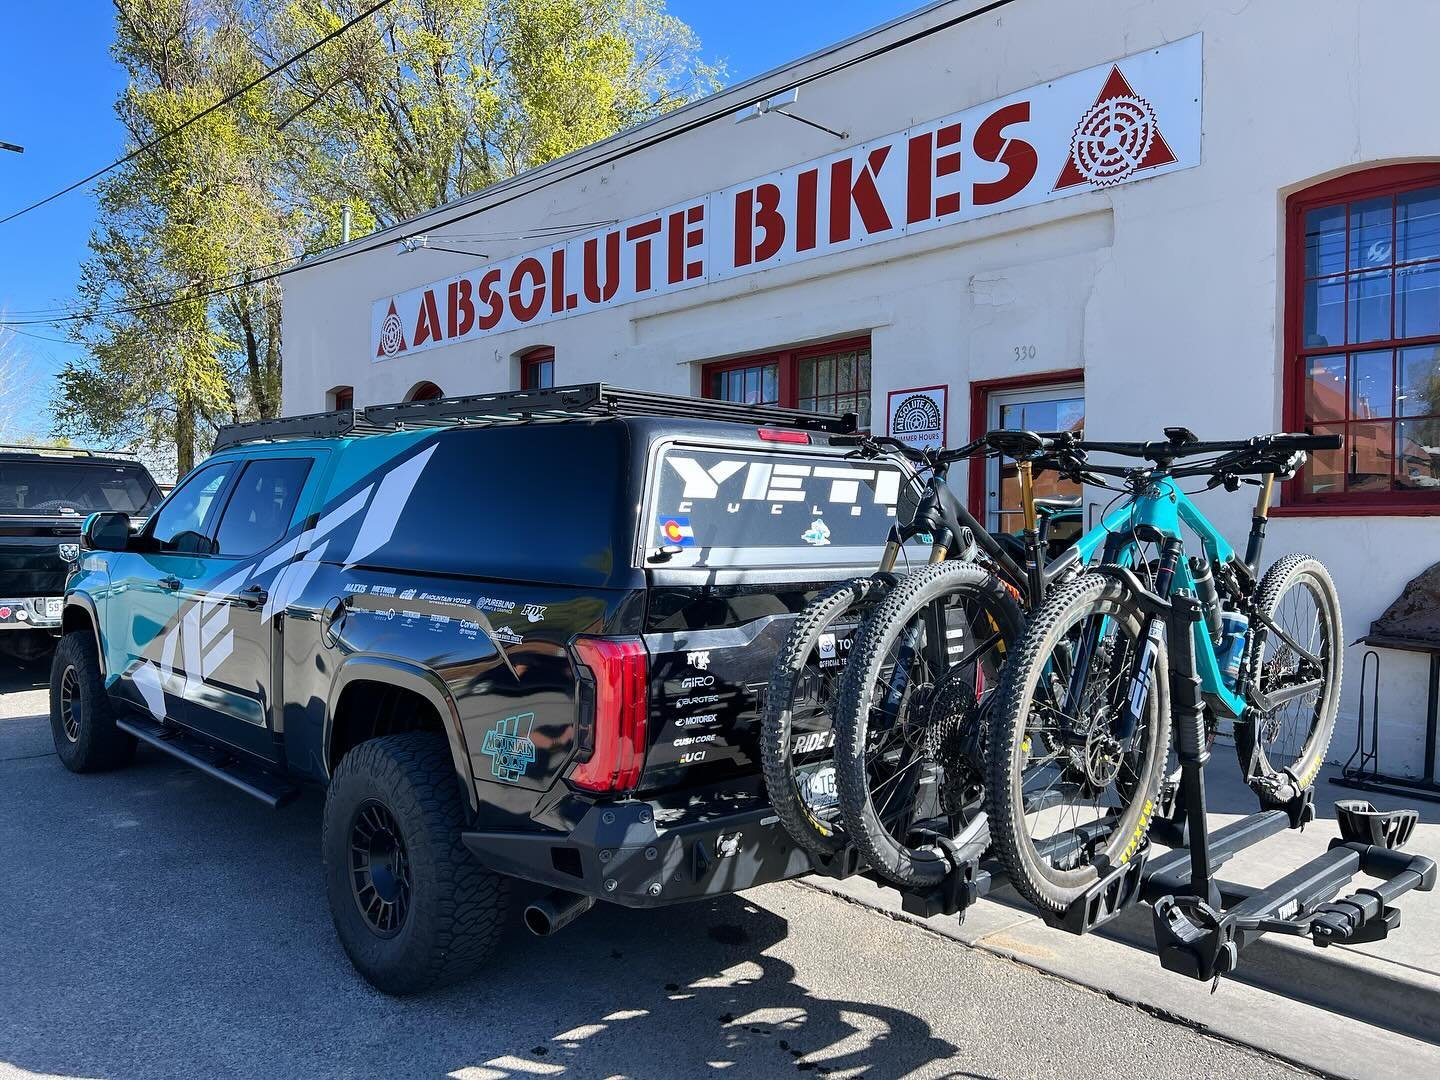 Recon trip for the 2024 @yeticycles Gathering. About to rock the Arkansas Hills trails!
We&rsquo;re stoked to be producing one of the best MTB parties in all the lands. The event is Friday 6/28 and Saturday 6/29 in @visitsalidaco